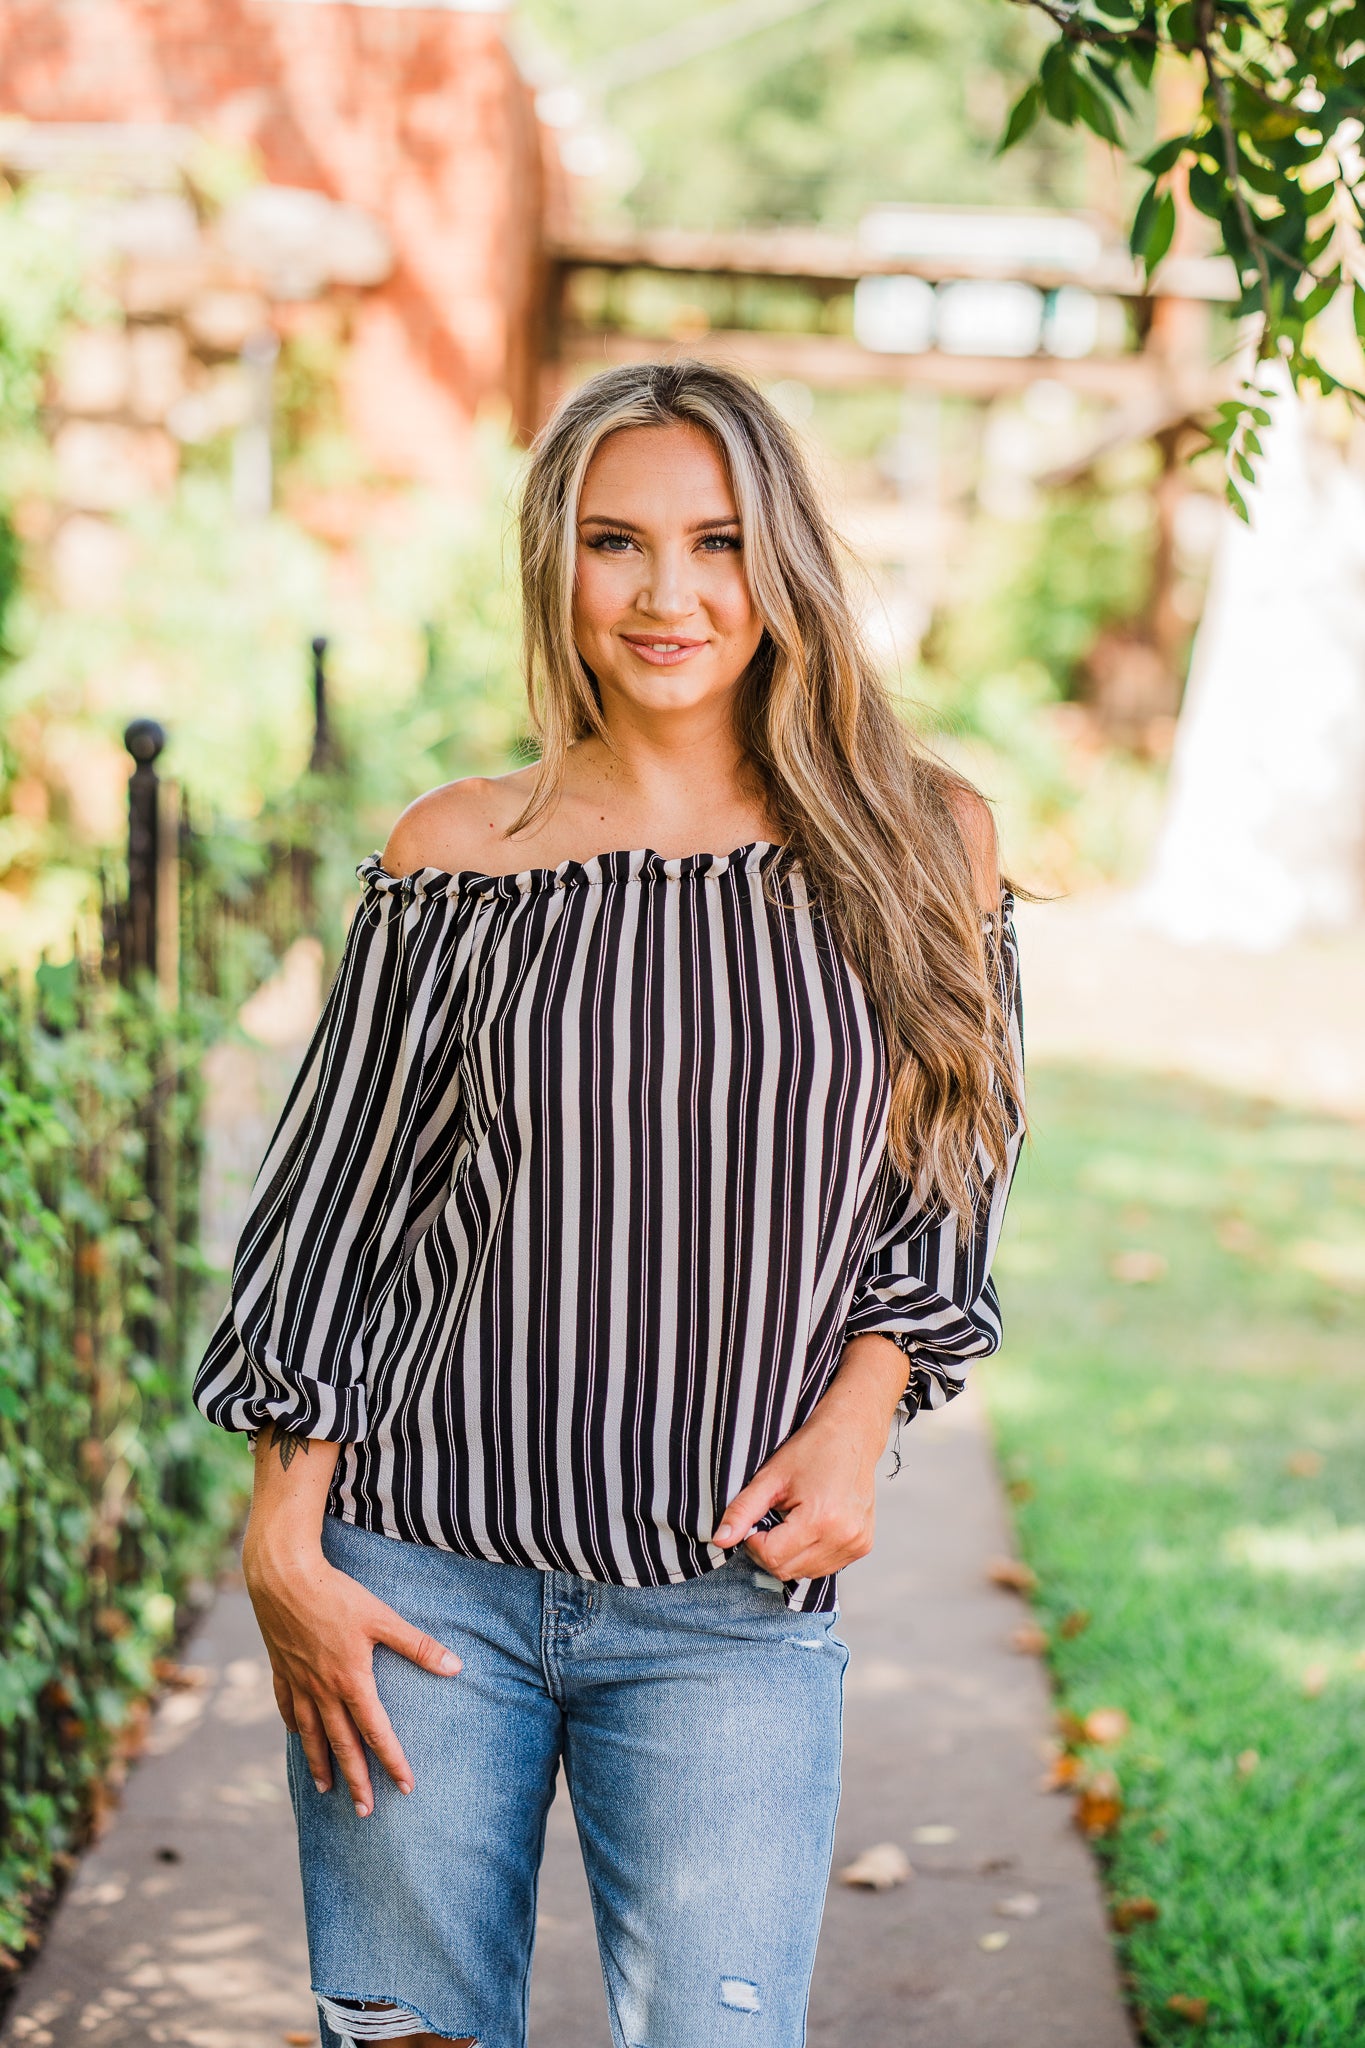 Black and White Striped Blouse